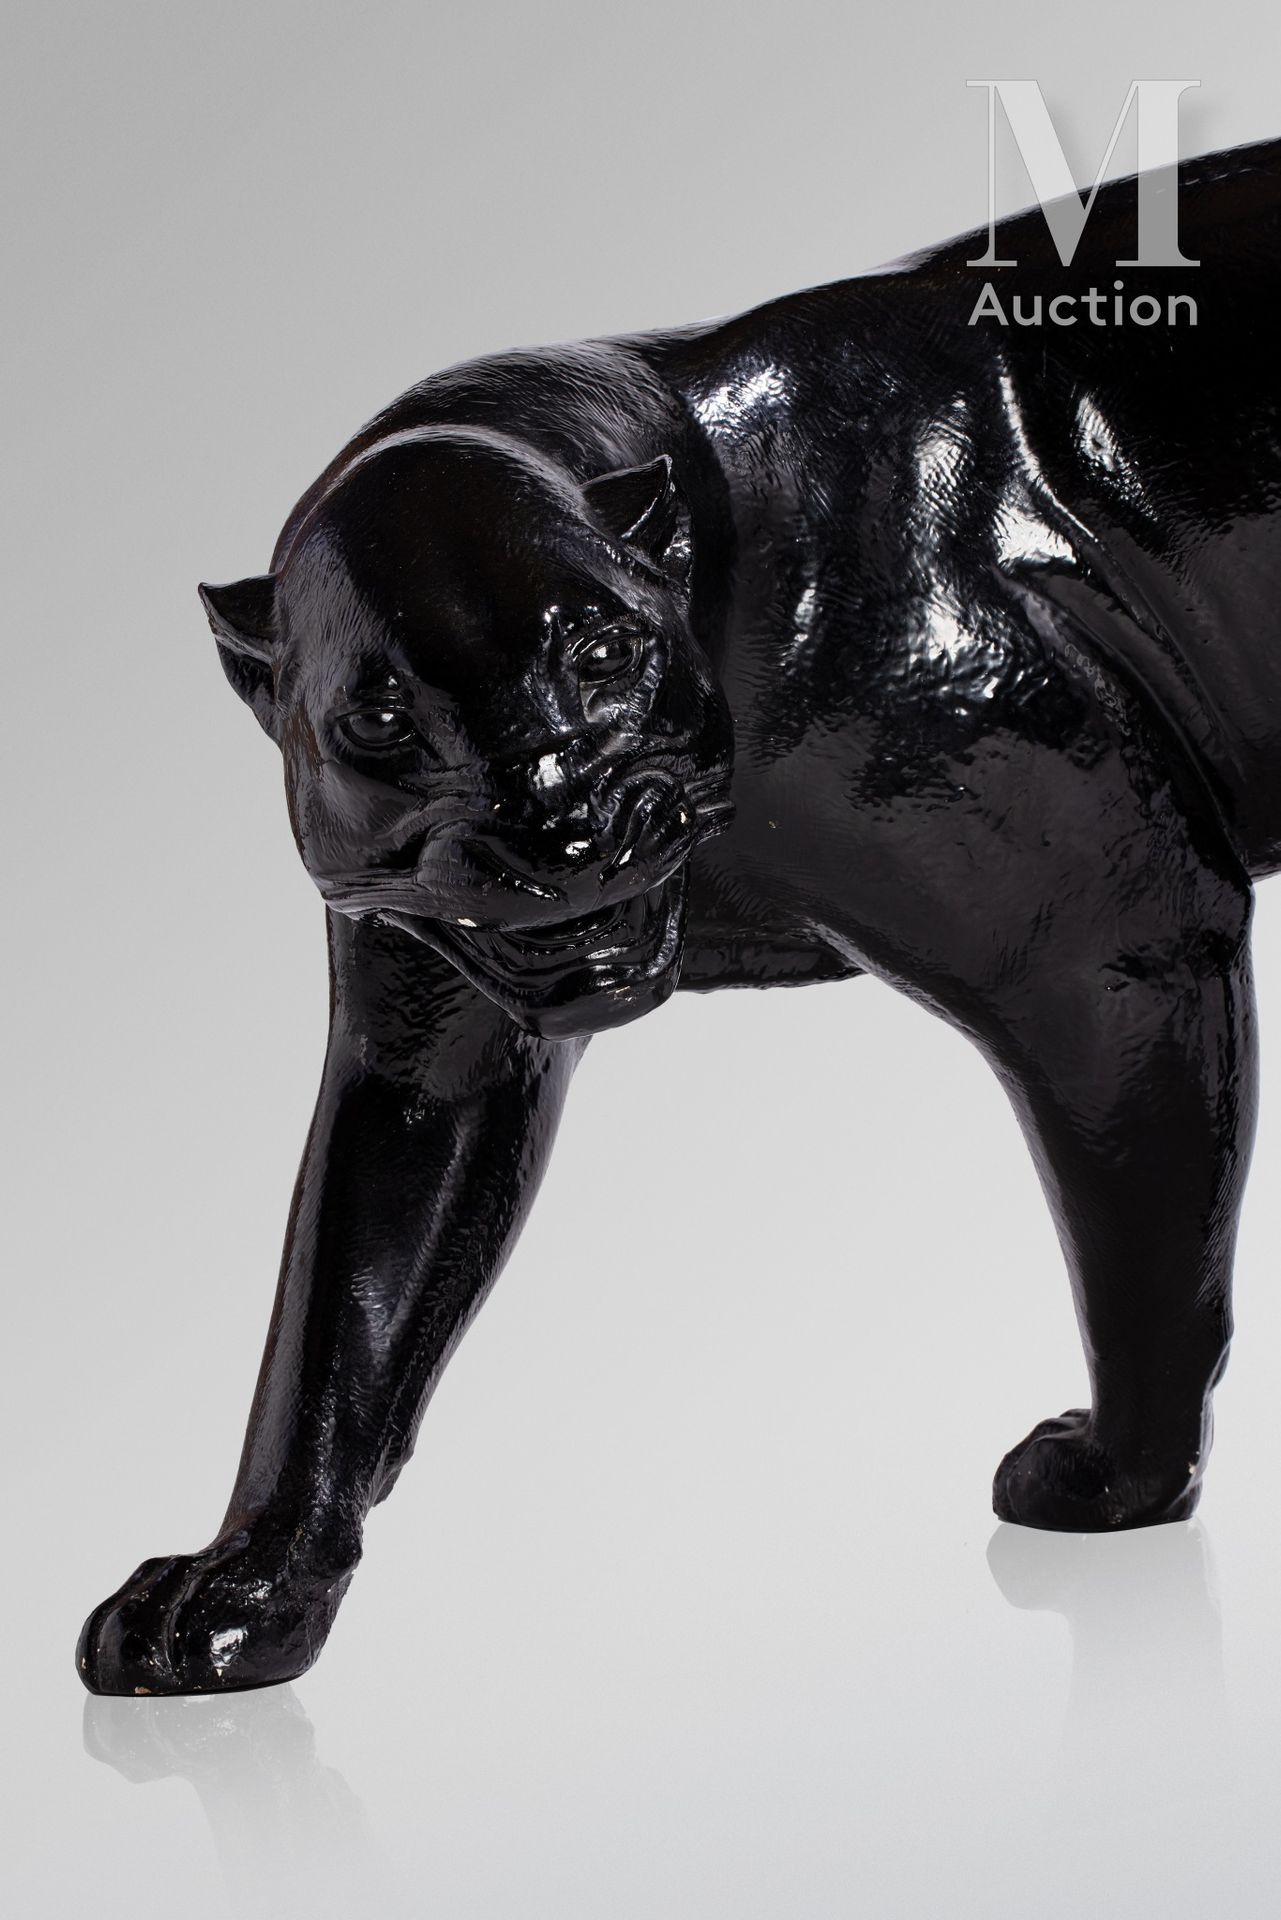 Null Auguste Nicolas TREMONT (1892 - 1980)

"Turning Panther".

Sculpture in bla&hellip;